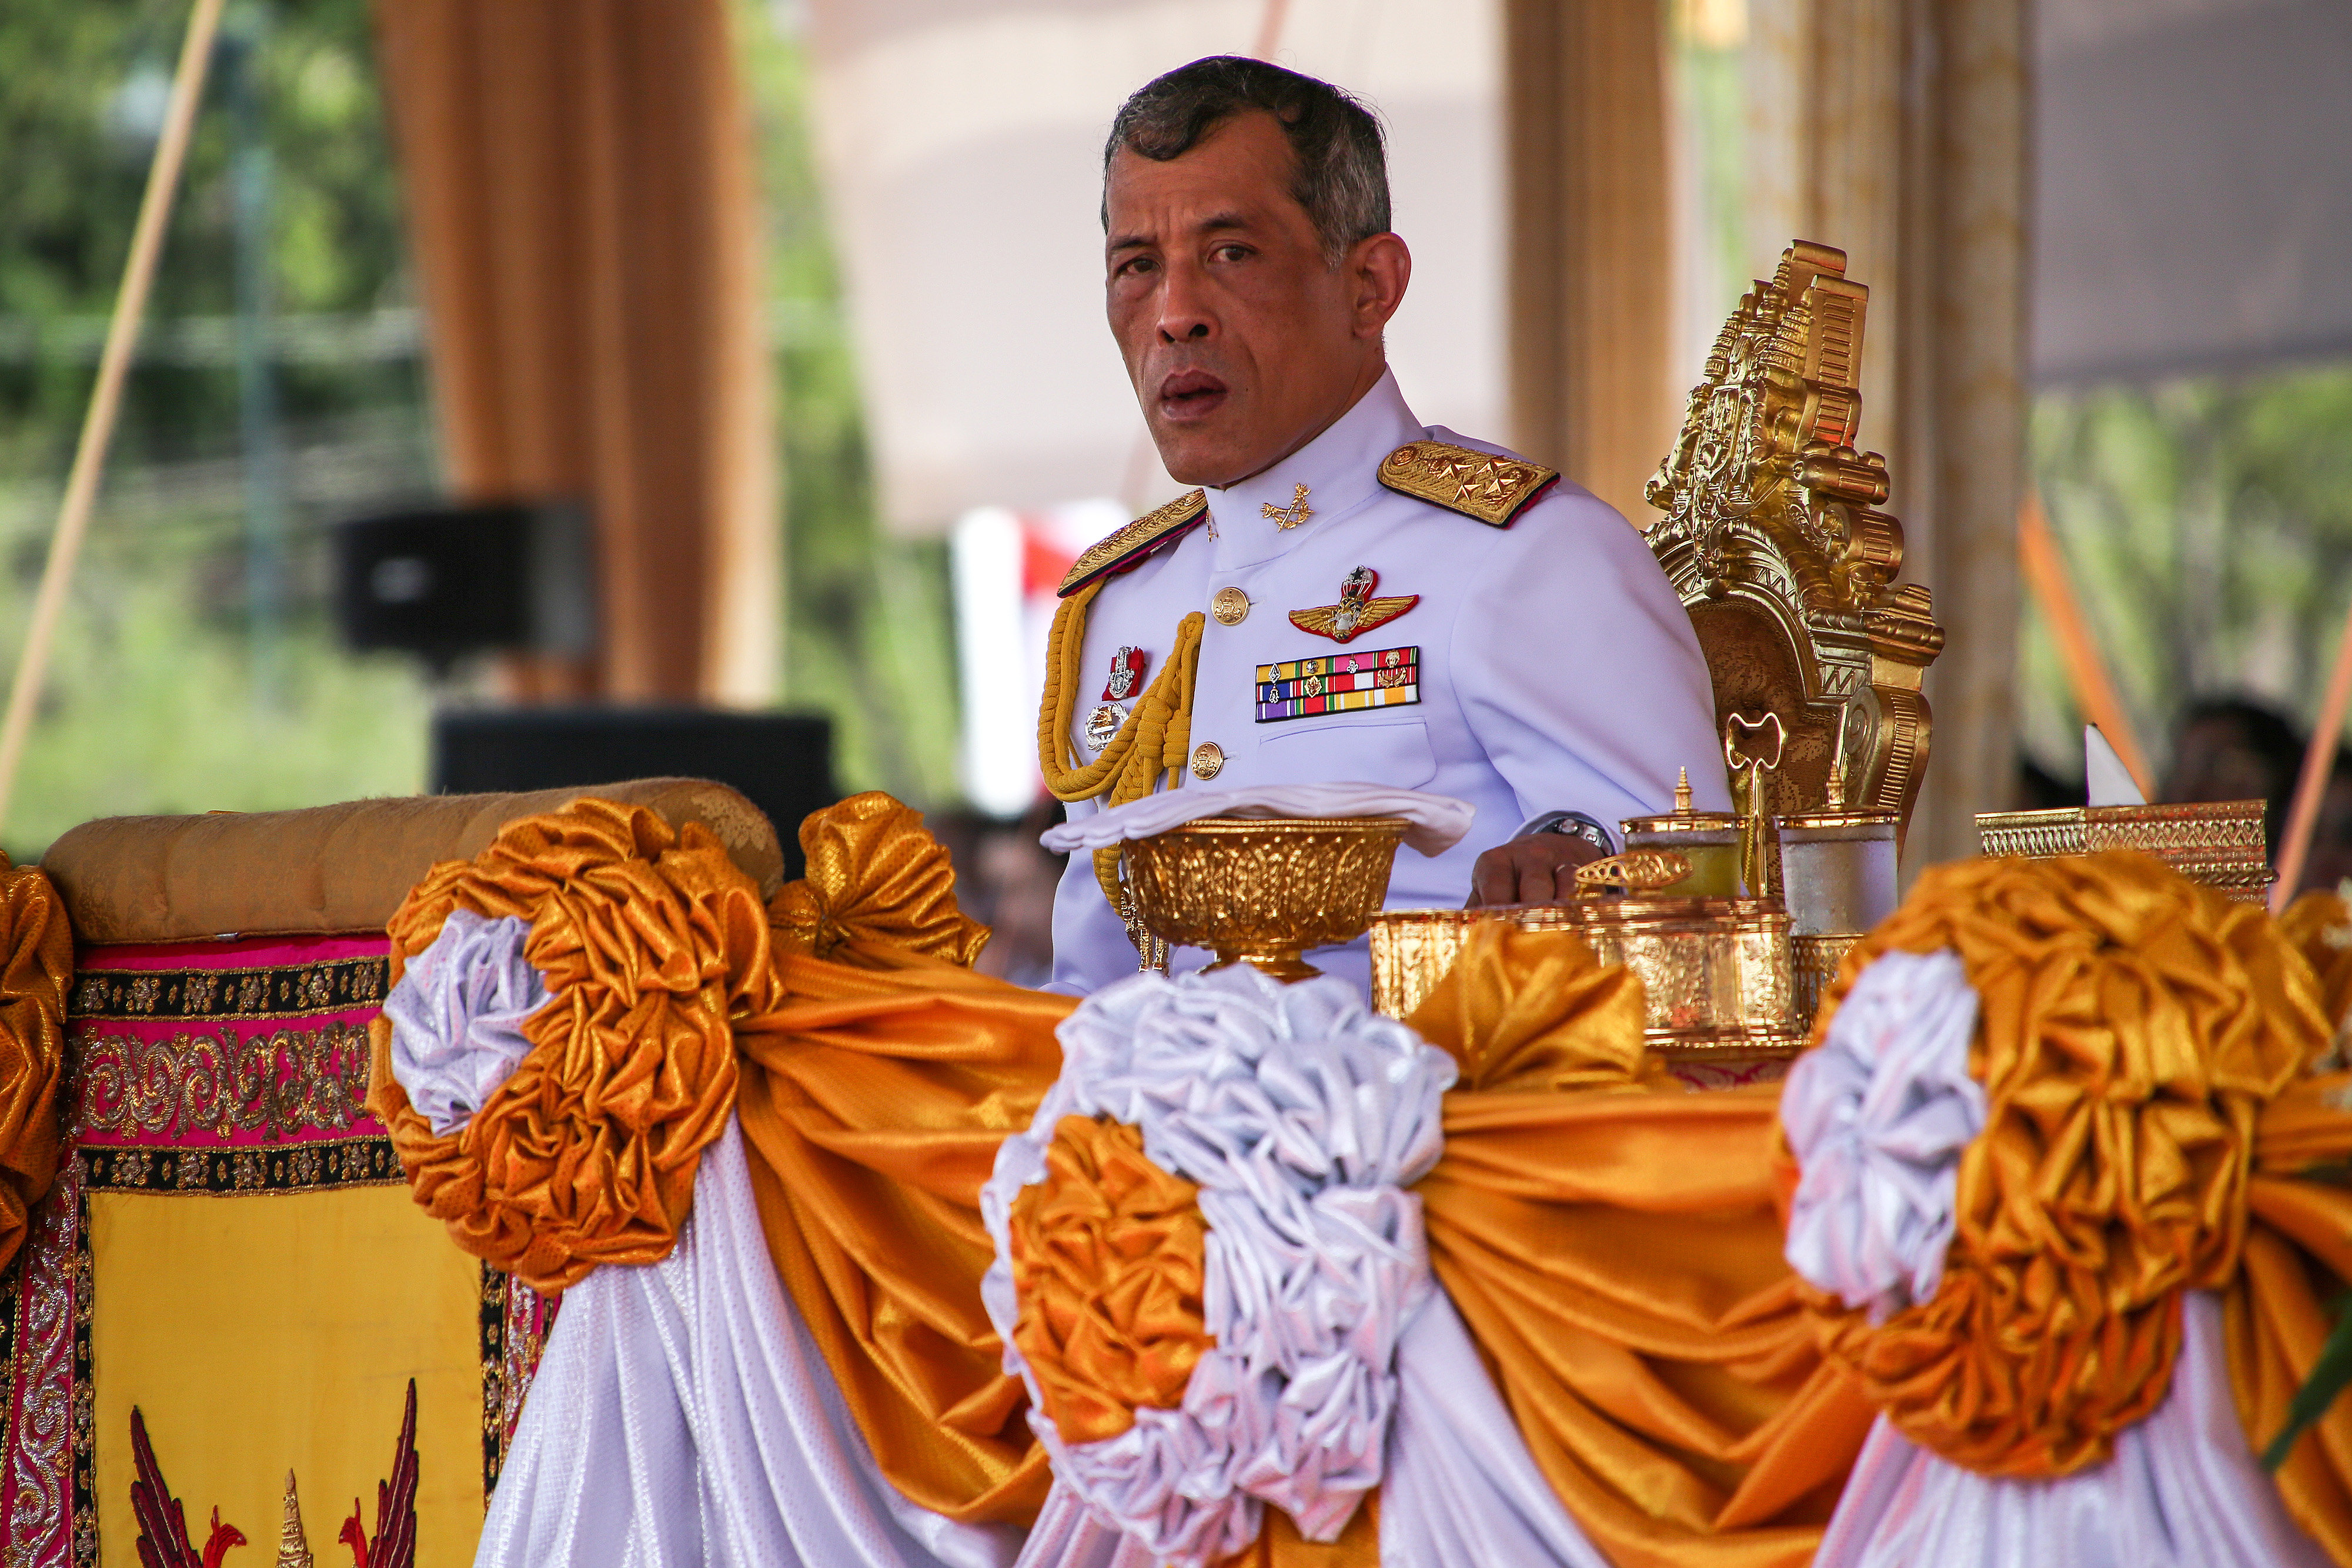 Crown Prince Maha Vajiralongkorn of Thailand attends a ceremony in Bangkok on May 9, 2016 (Bloomberg via Getty Images)